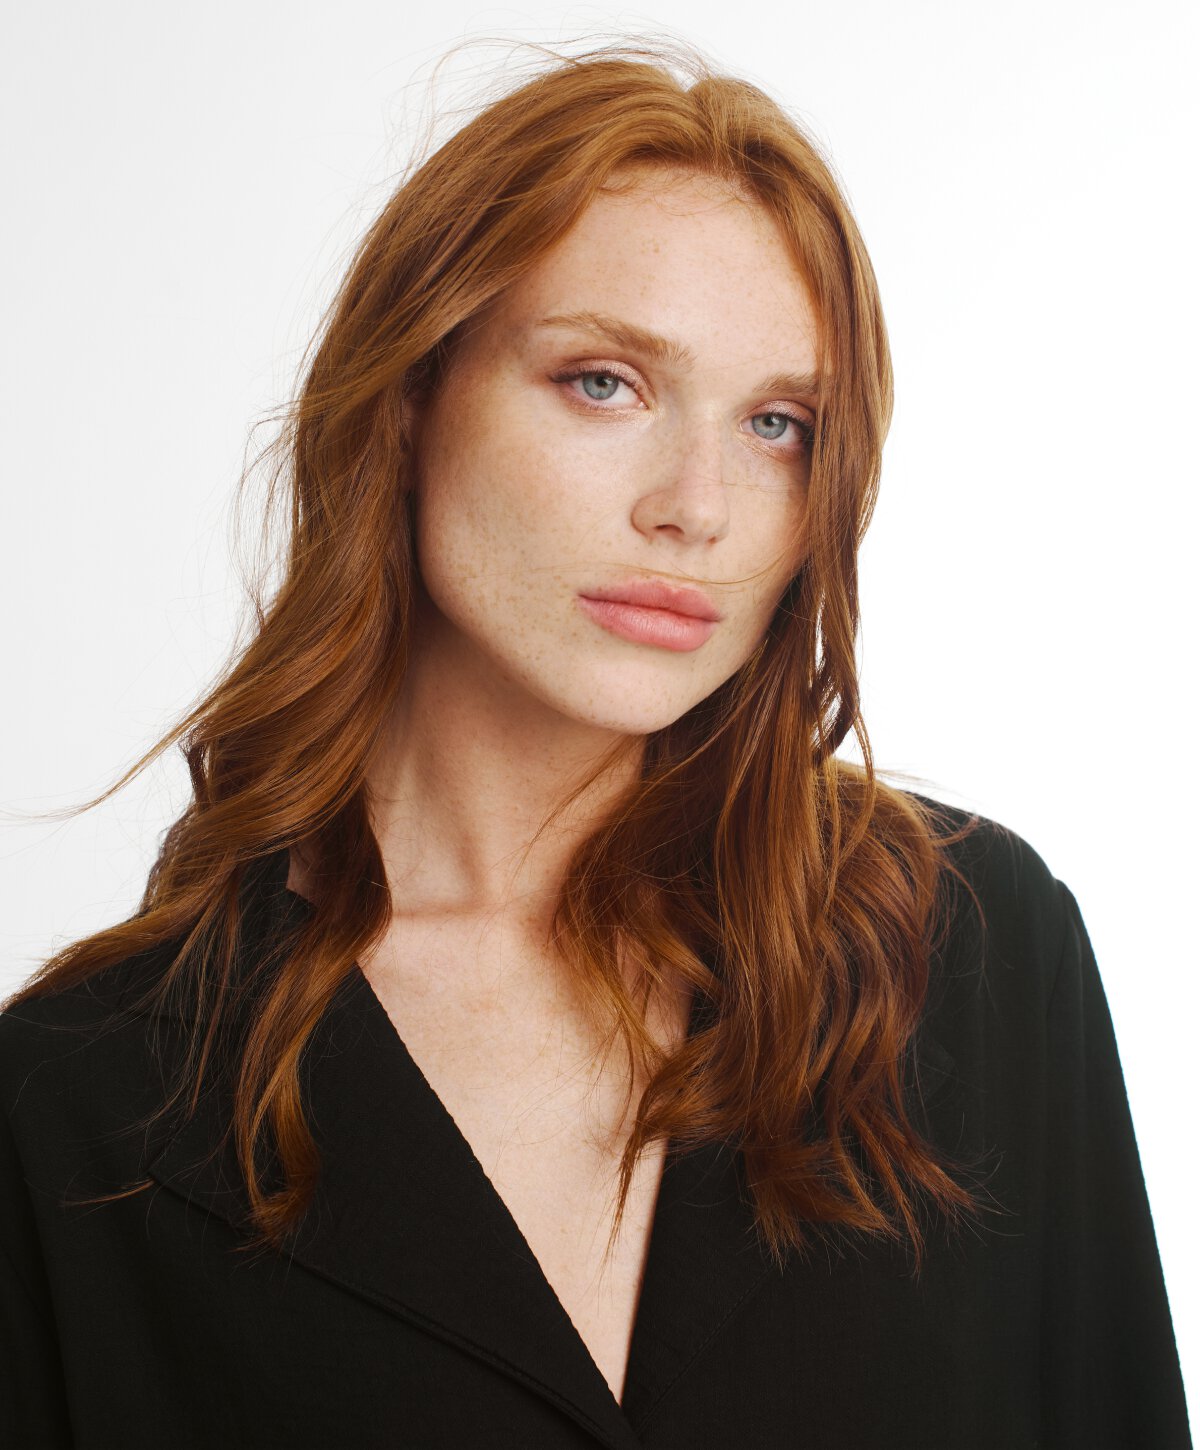 Toronto brow lift model with red hair